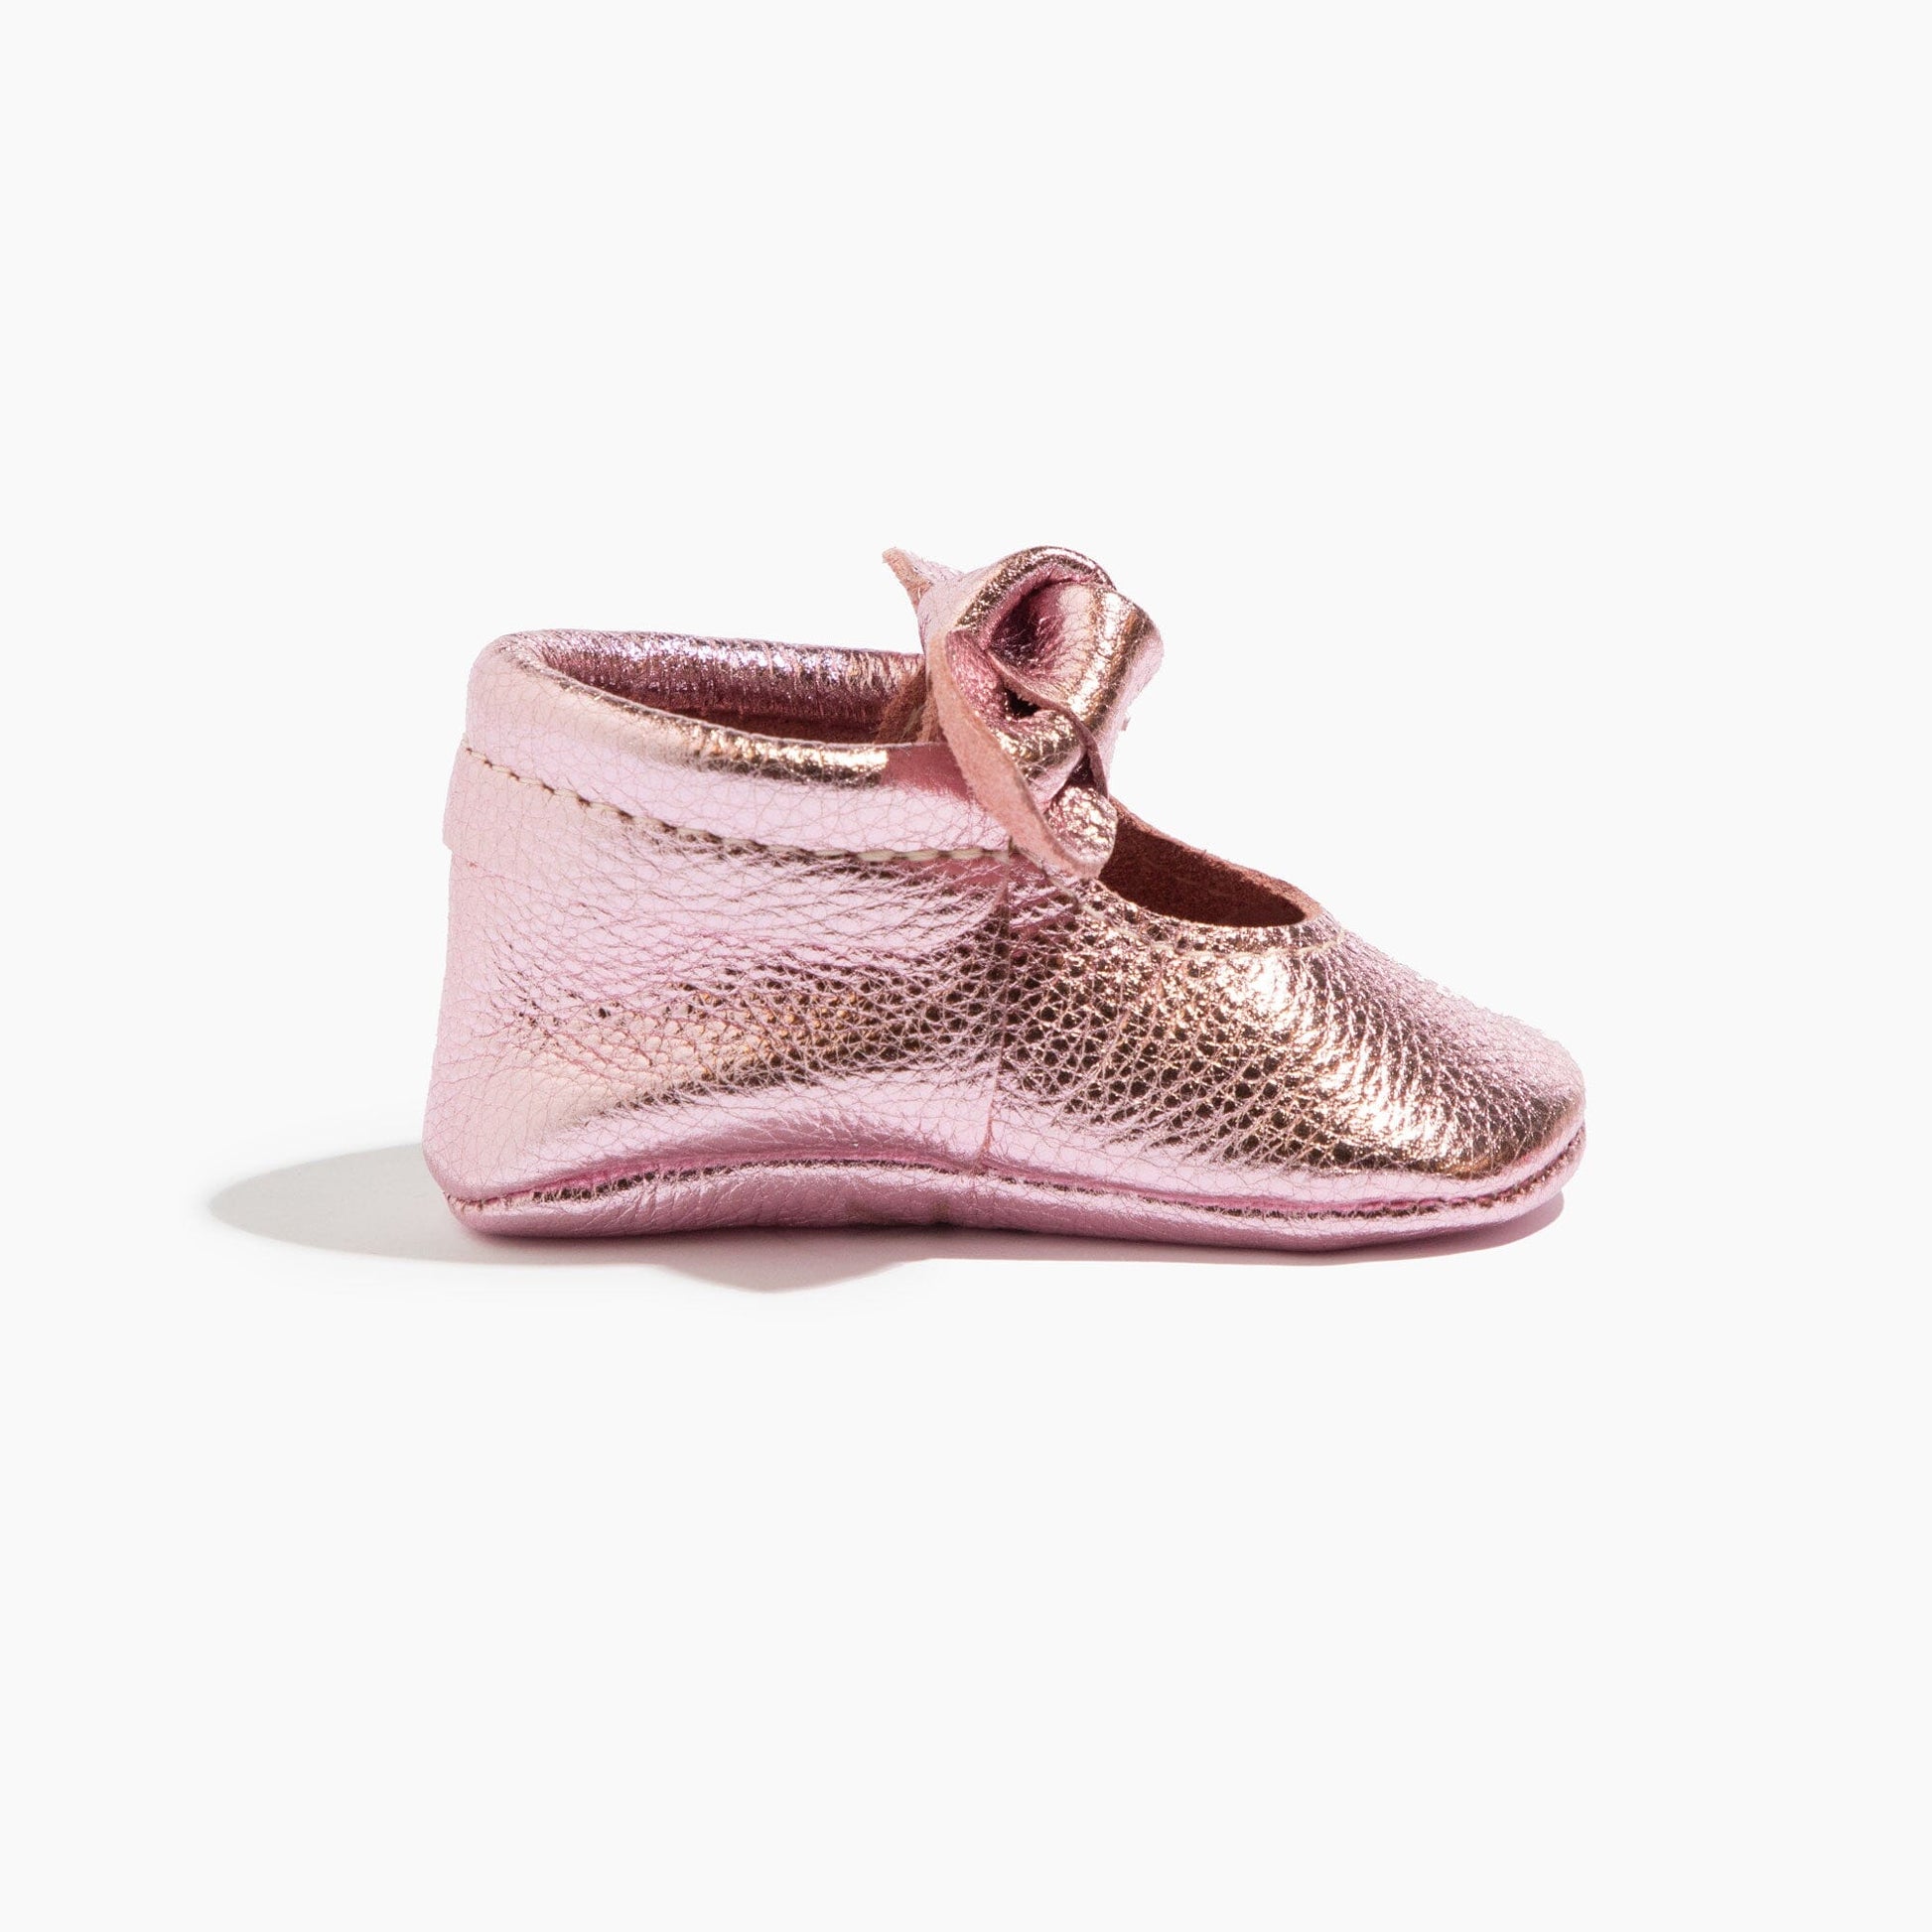 Frosted Rose Knotted Bow Mocc Knotted Bow Mocc Soft Sole 